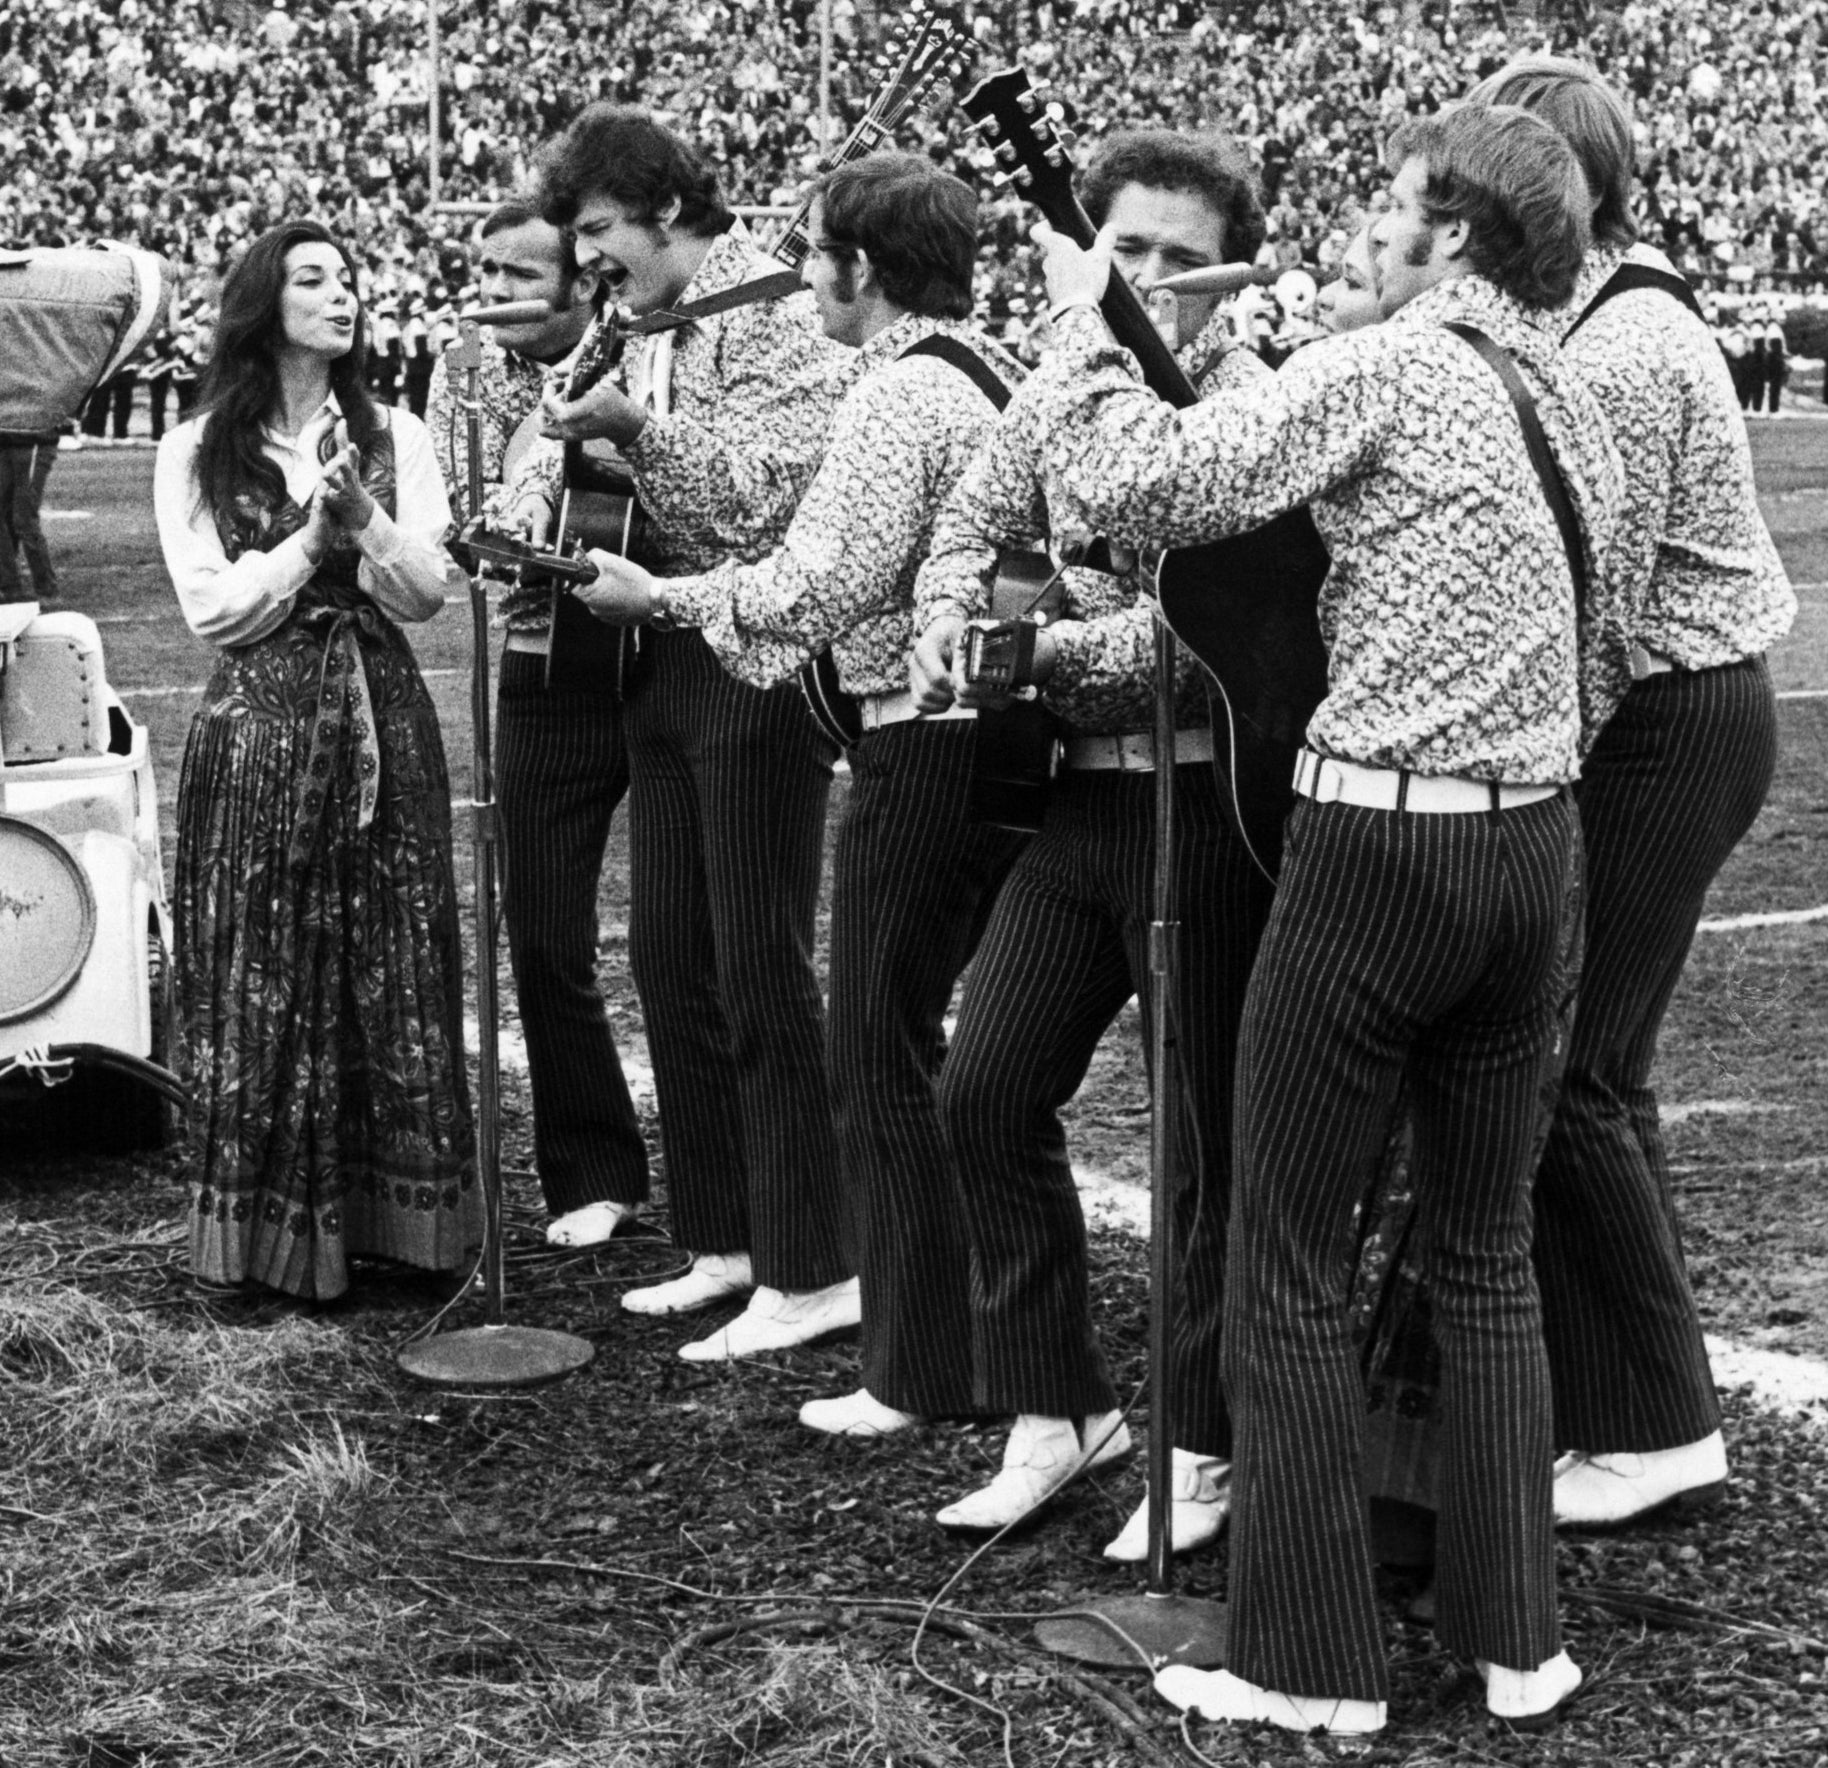 New Christy Minstrels perform on the field during the halftime show at Super Bowl IV in Tulane Stadium, New Orleans, Louisiana, January 11, 1970